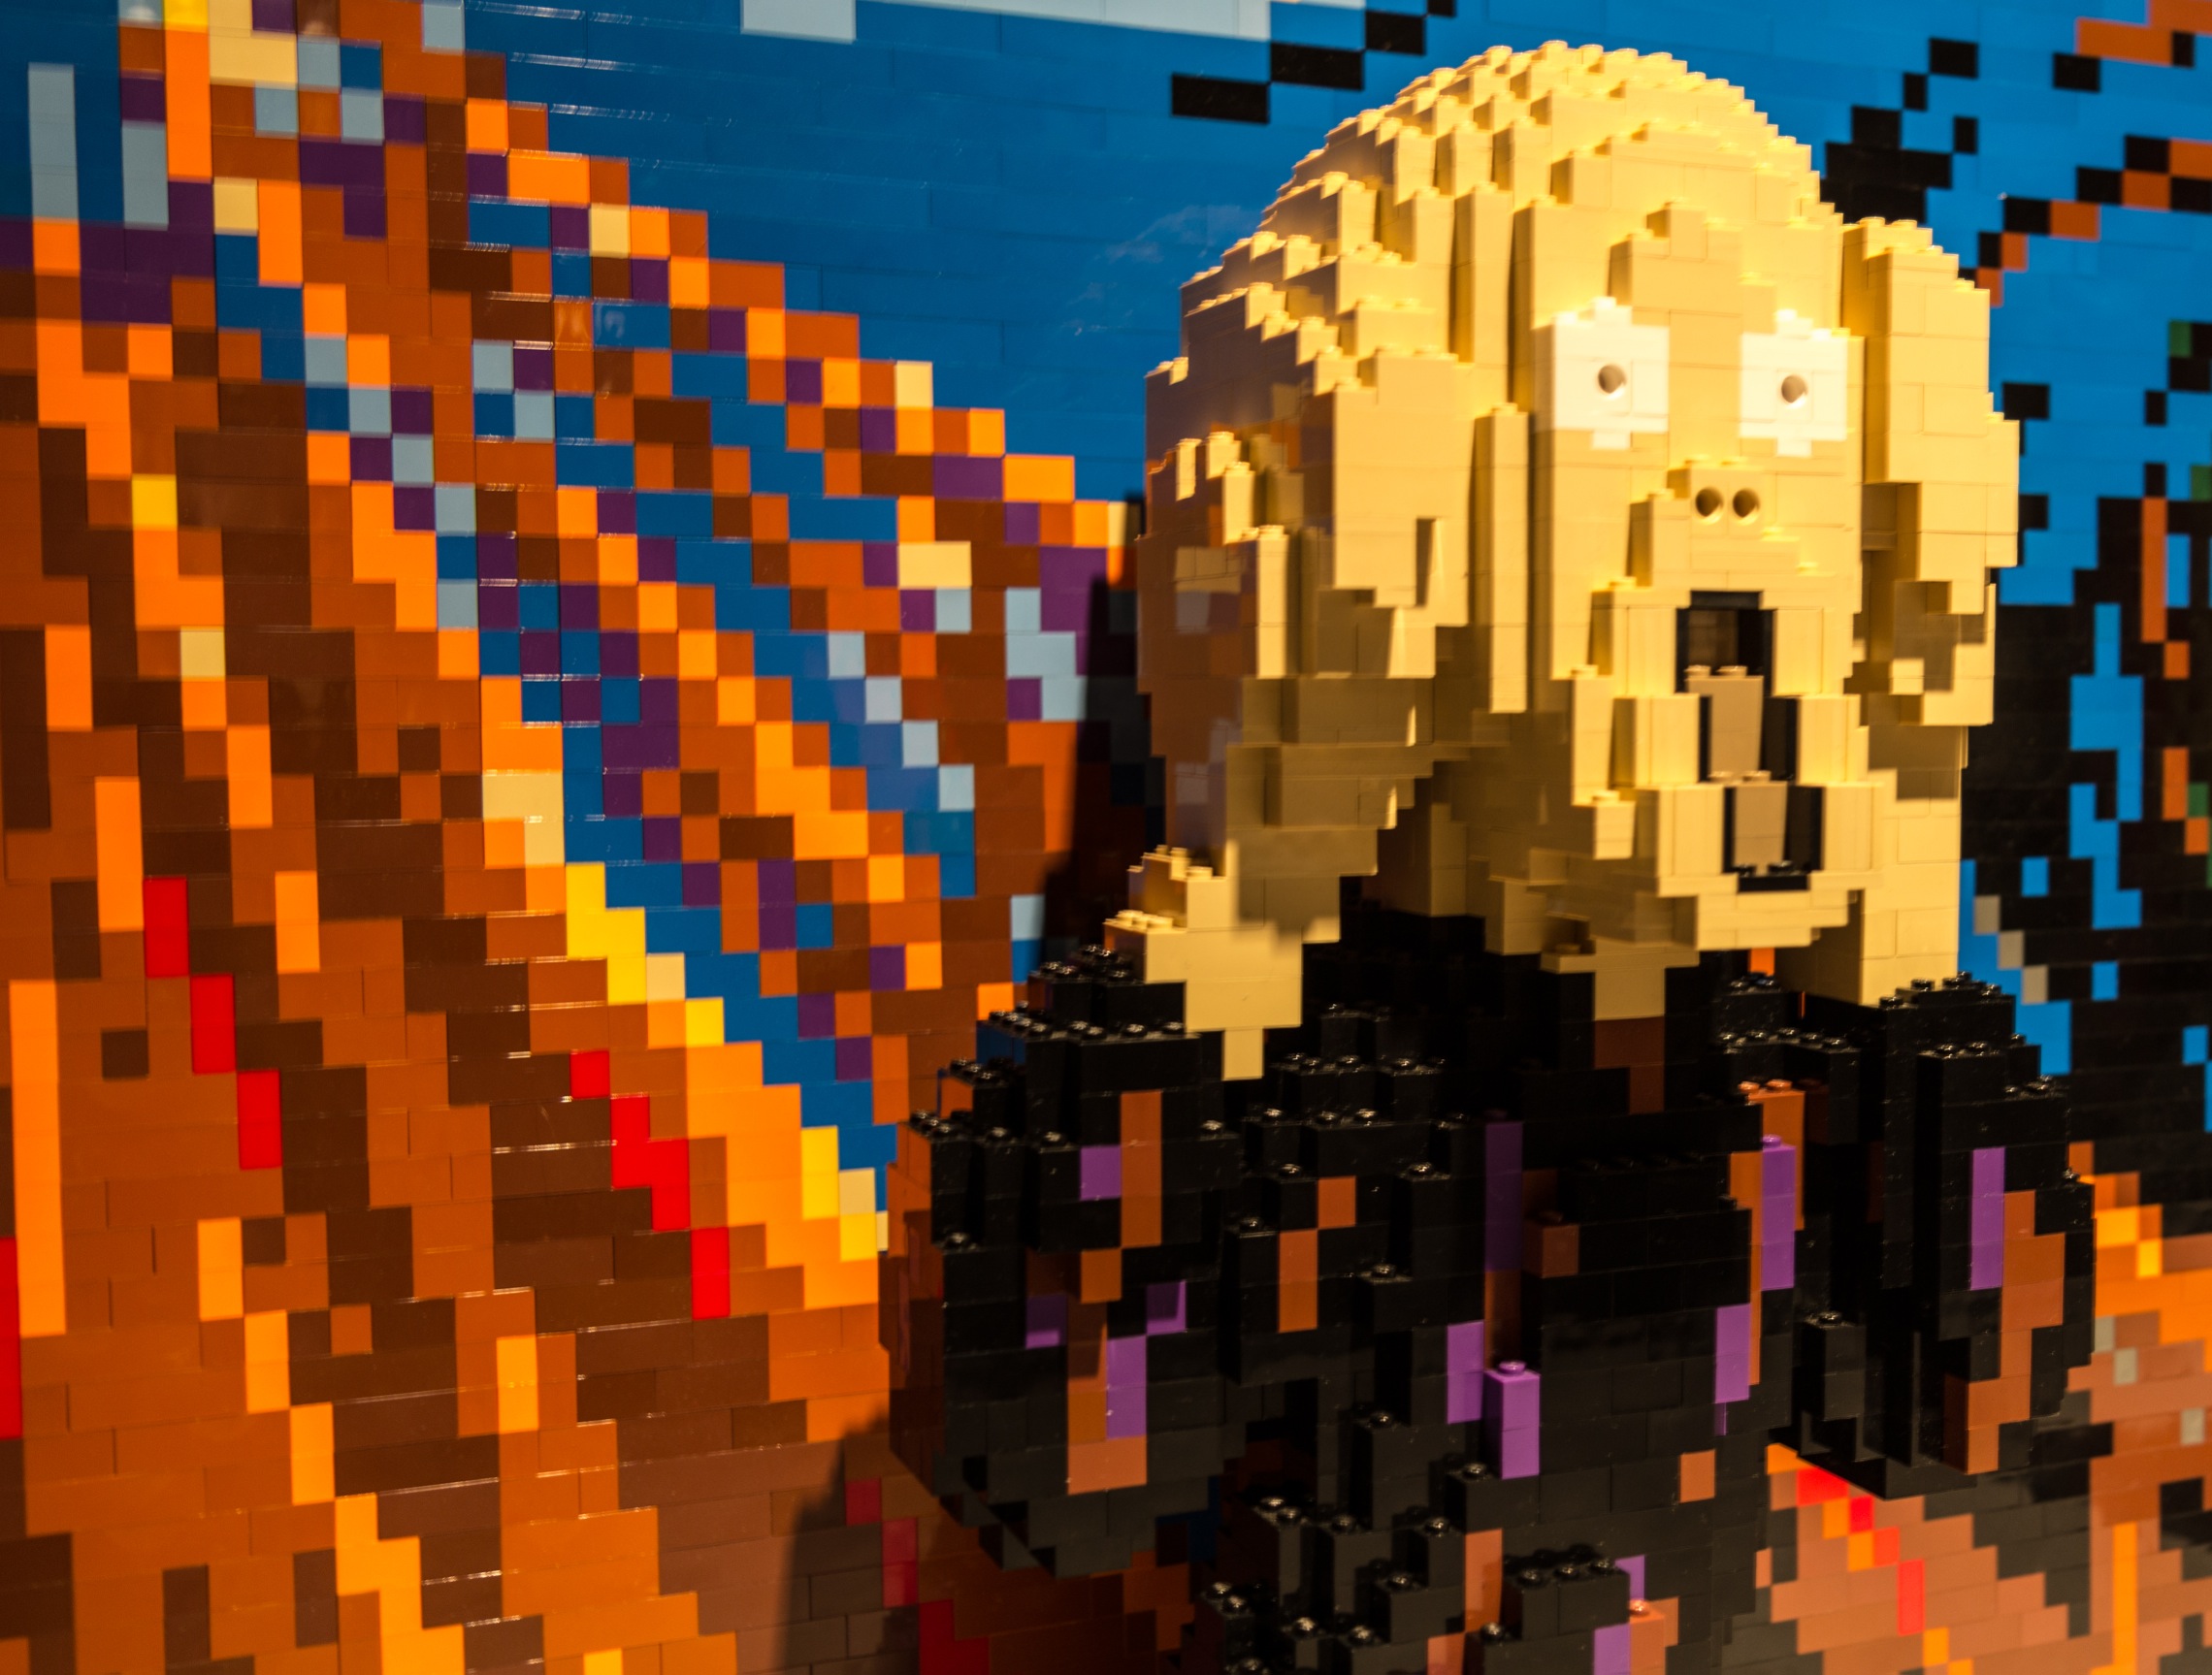 The Art of the Brick: the most famous LEGO® Art Exhibition